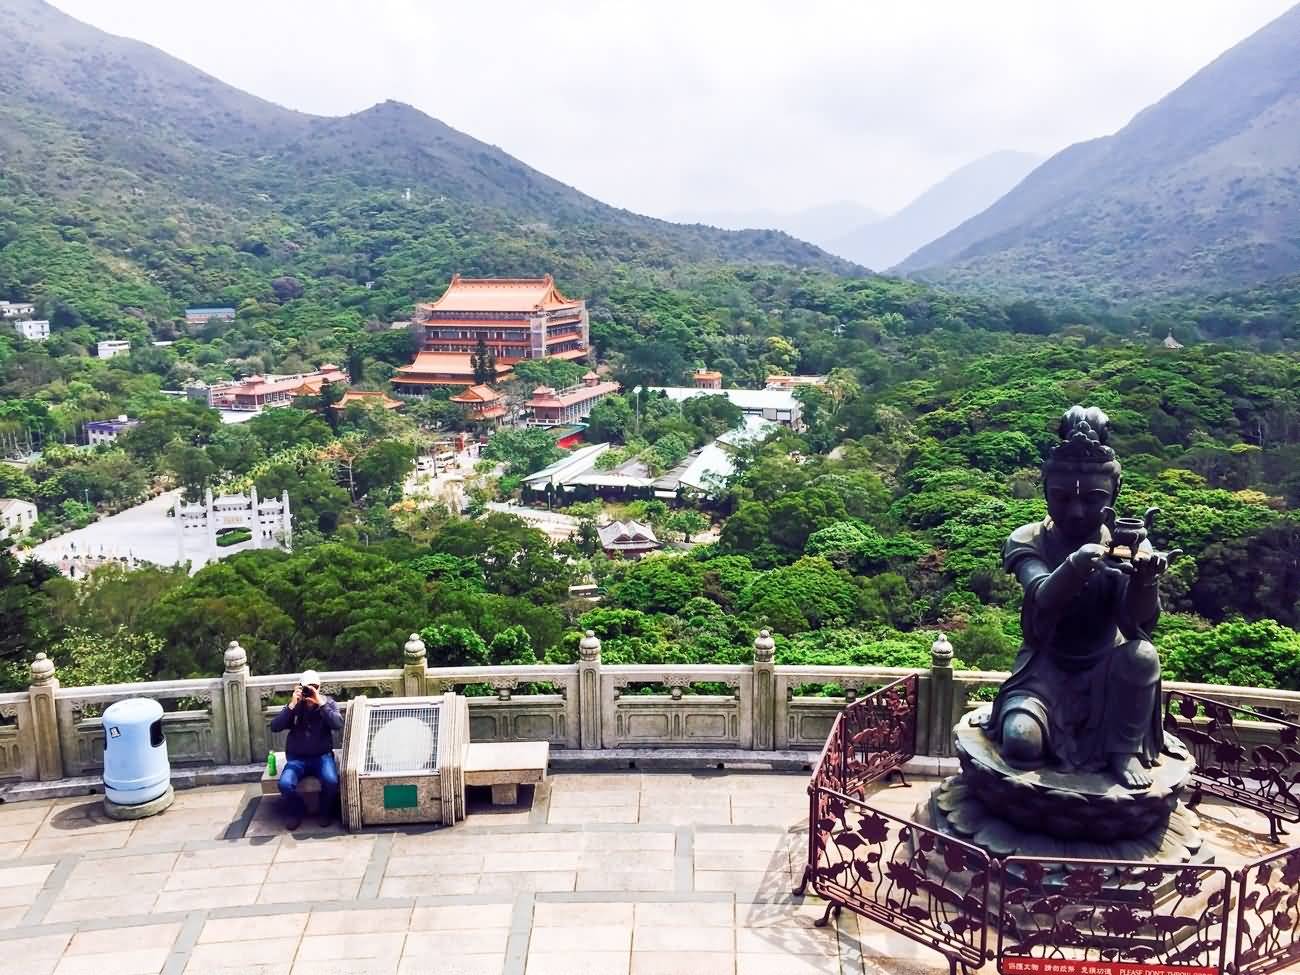 View Of The Po Lin Monastery From The Tian Tan Buddha